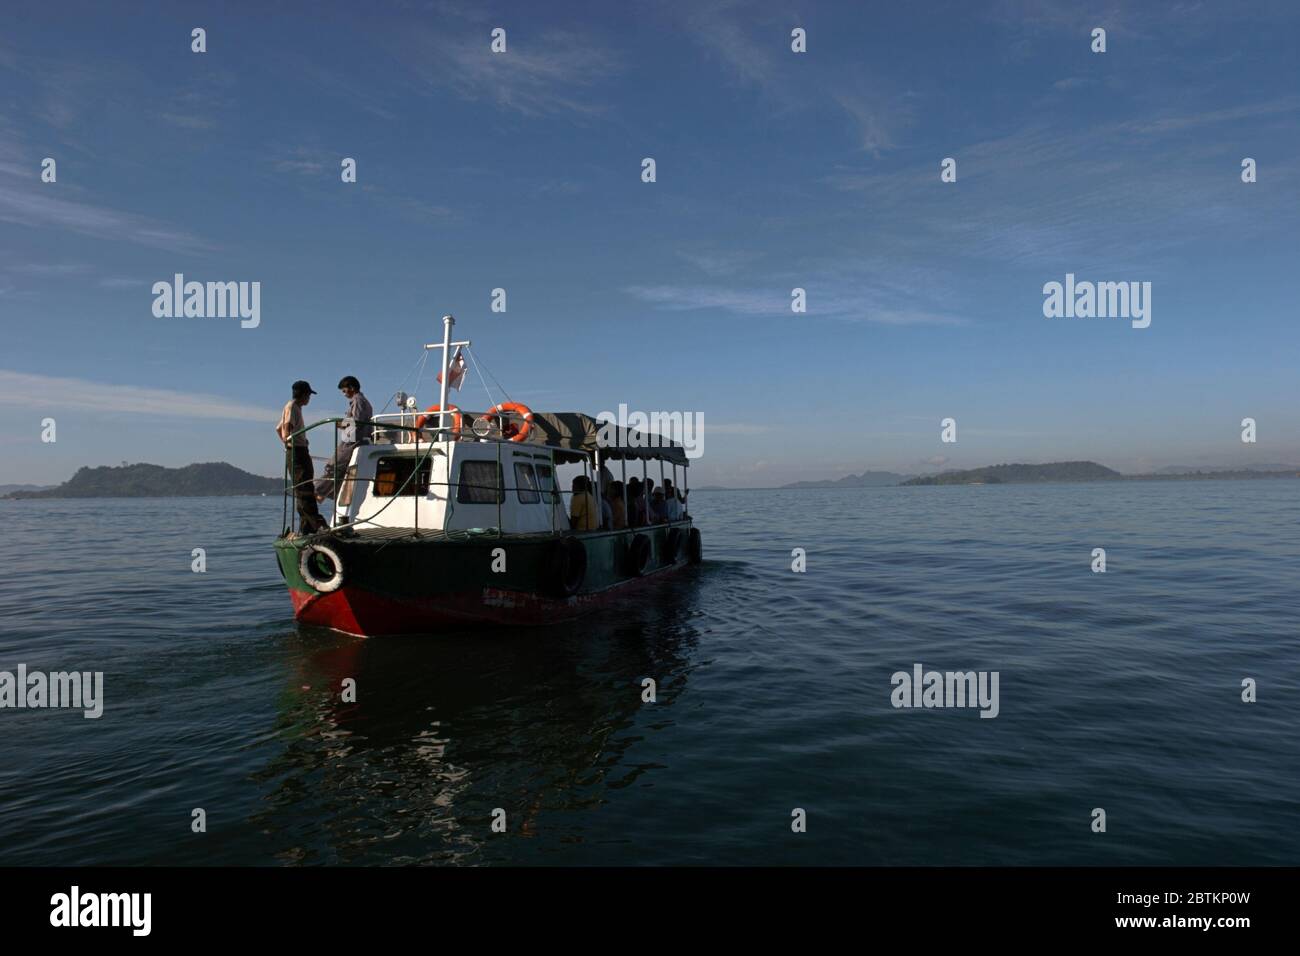 A small ferry boat transporting passengers to neighboring villages in Sibolga Bay from Sibolga City. Sibolga, North Sumatra, Indonesia. Archival photo (2005). Stock Photo